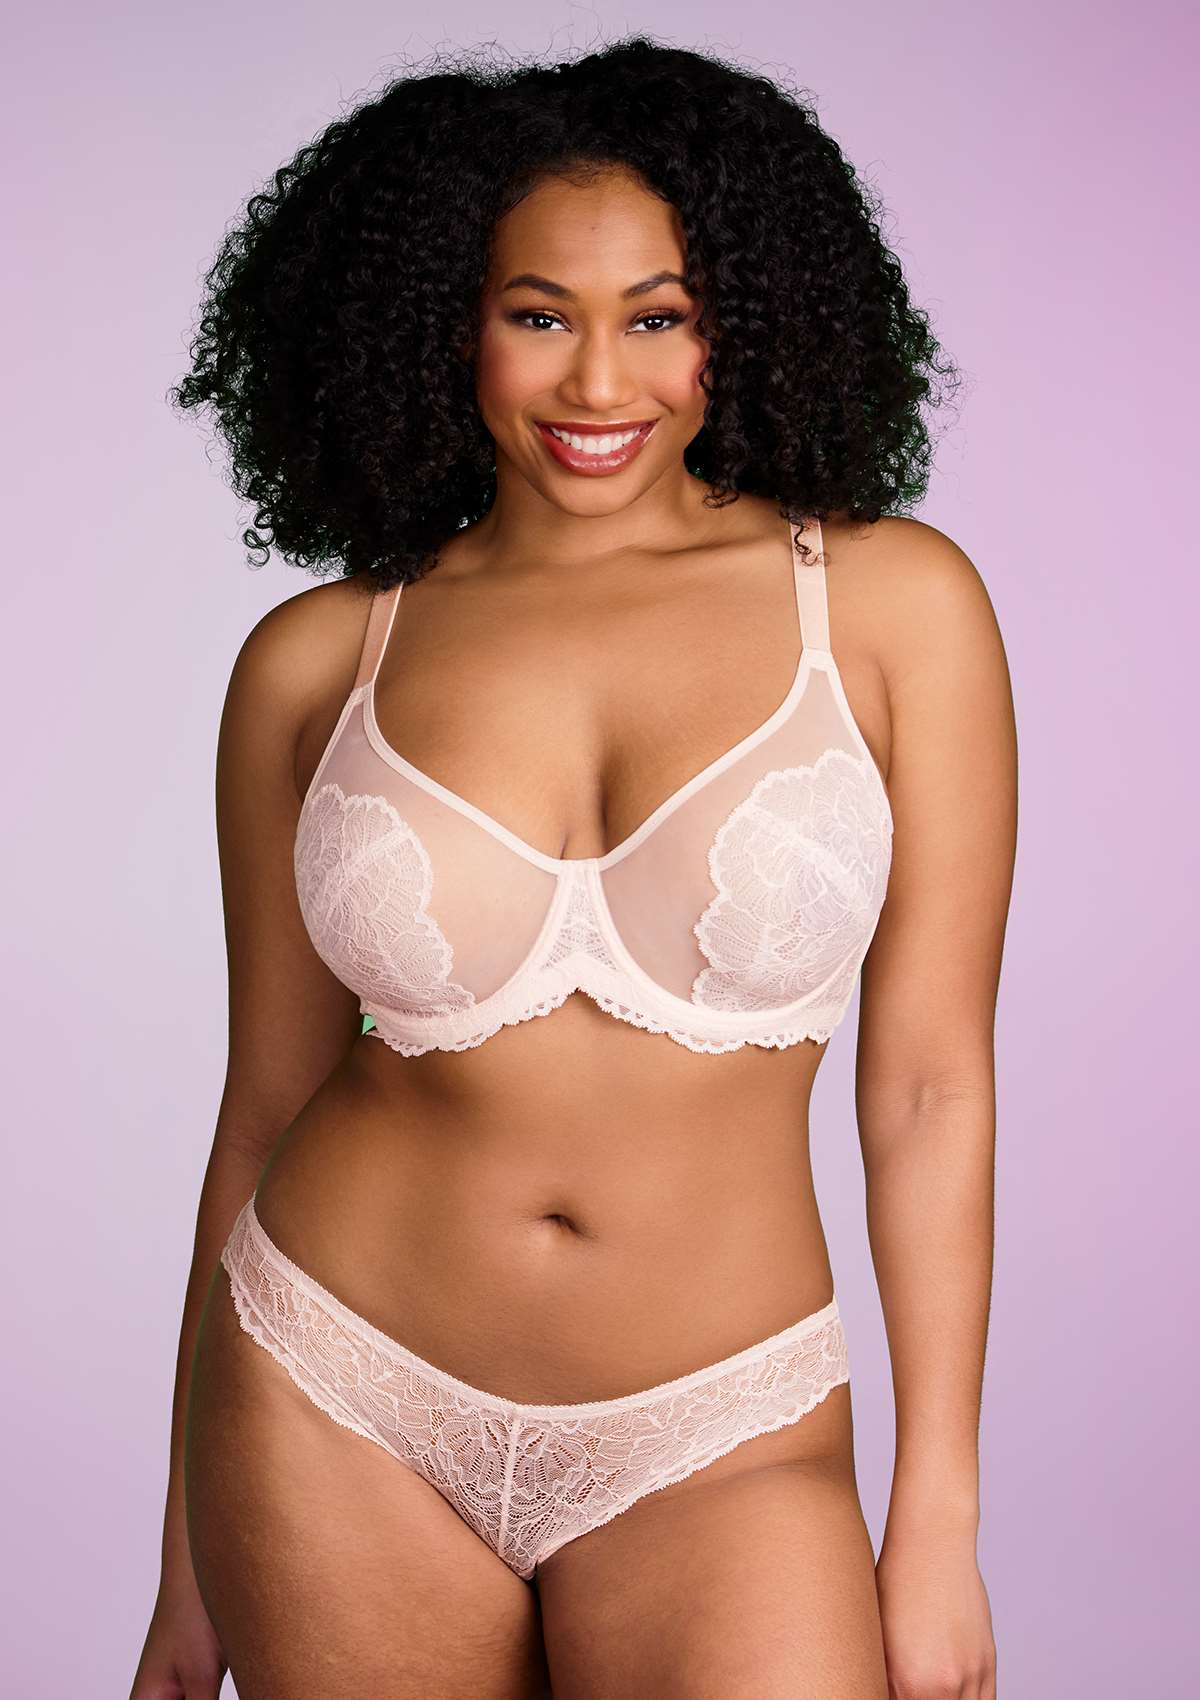 HSIA Blossom Matching Lacey Underwear And Bra Set: Sexy Lace Bra - Dusty Peach / 42 / C